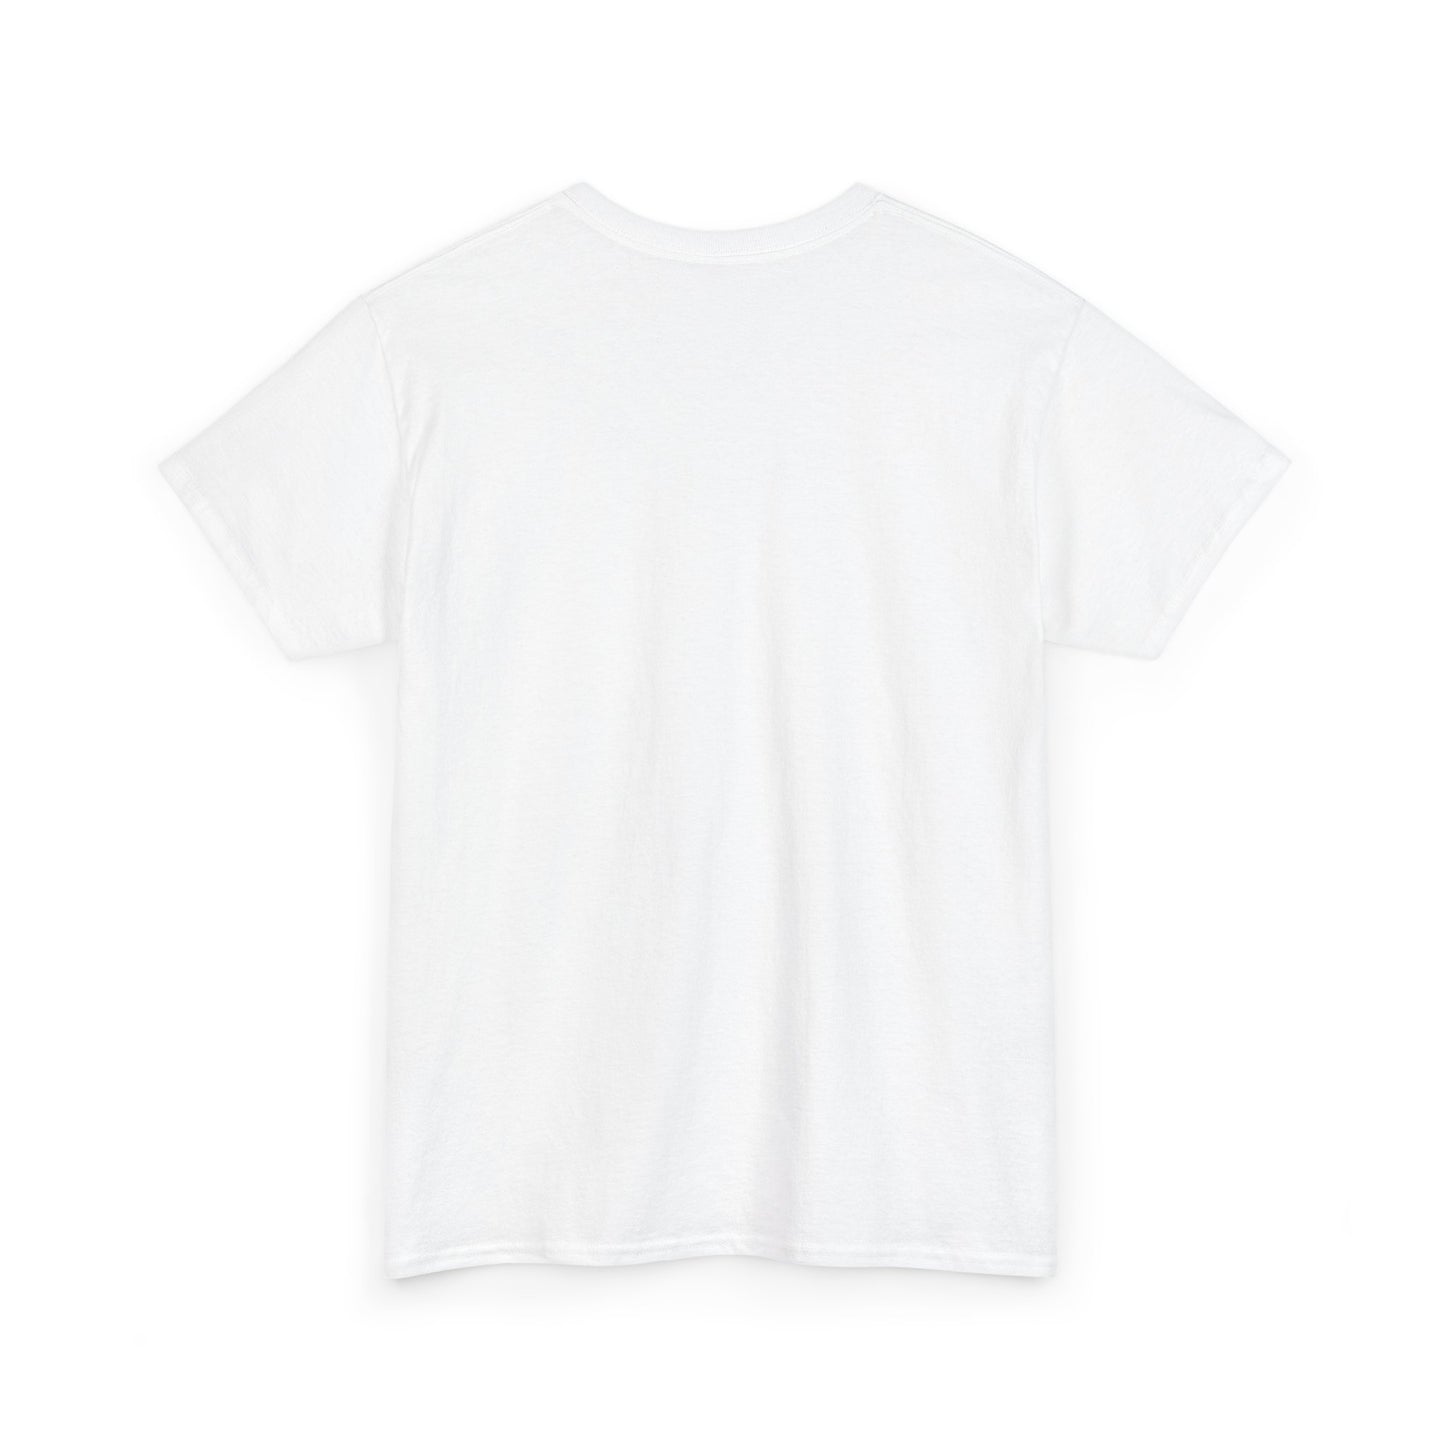 "Please Help Me Find Molly.com" T-shirt - regular fit